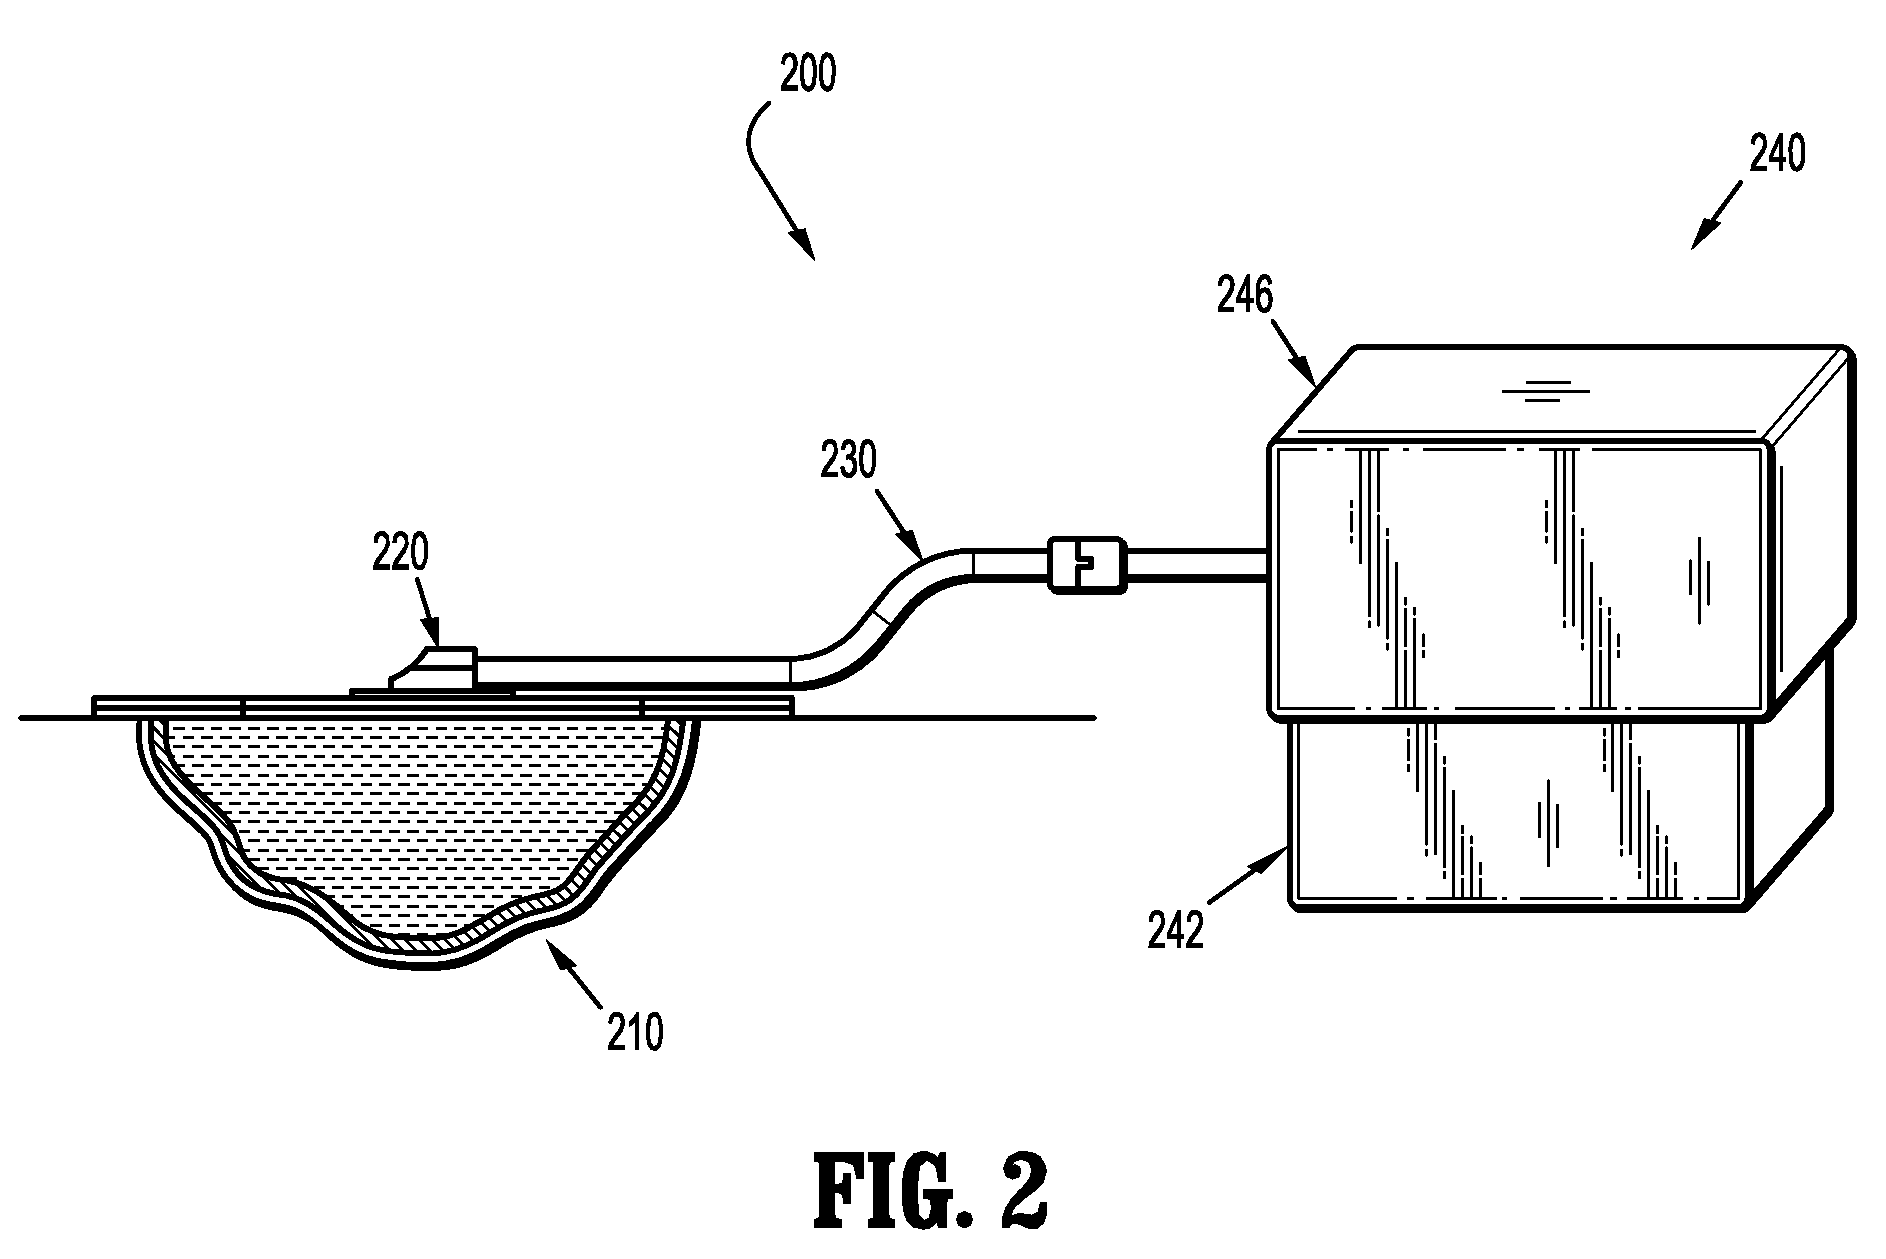 Orientation independent canister for a negative pressure wound therapy device